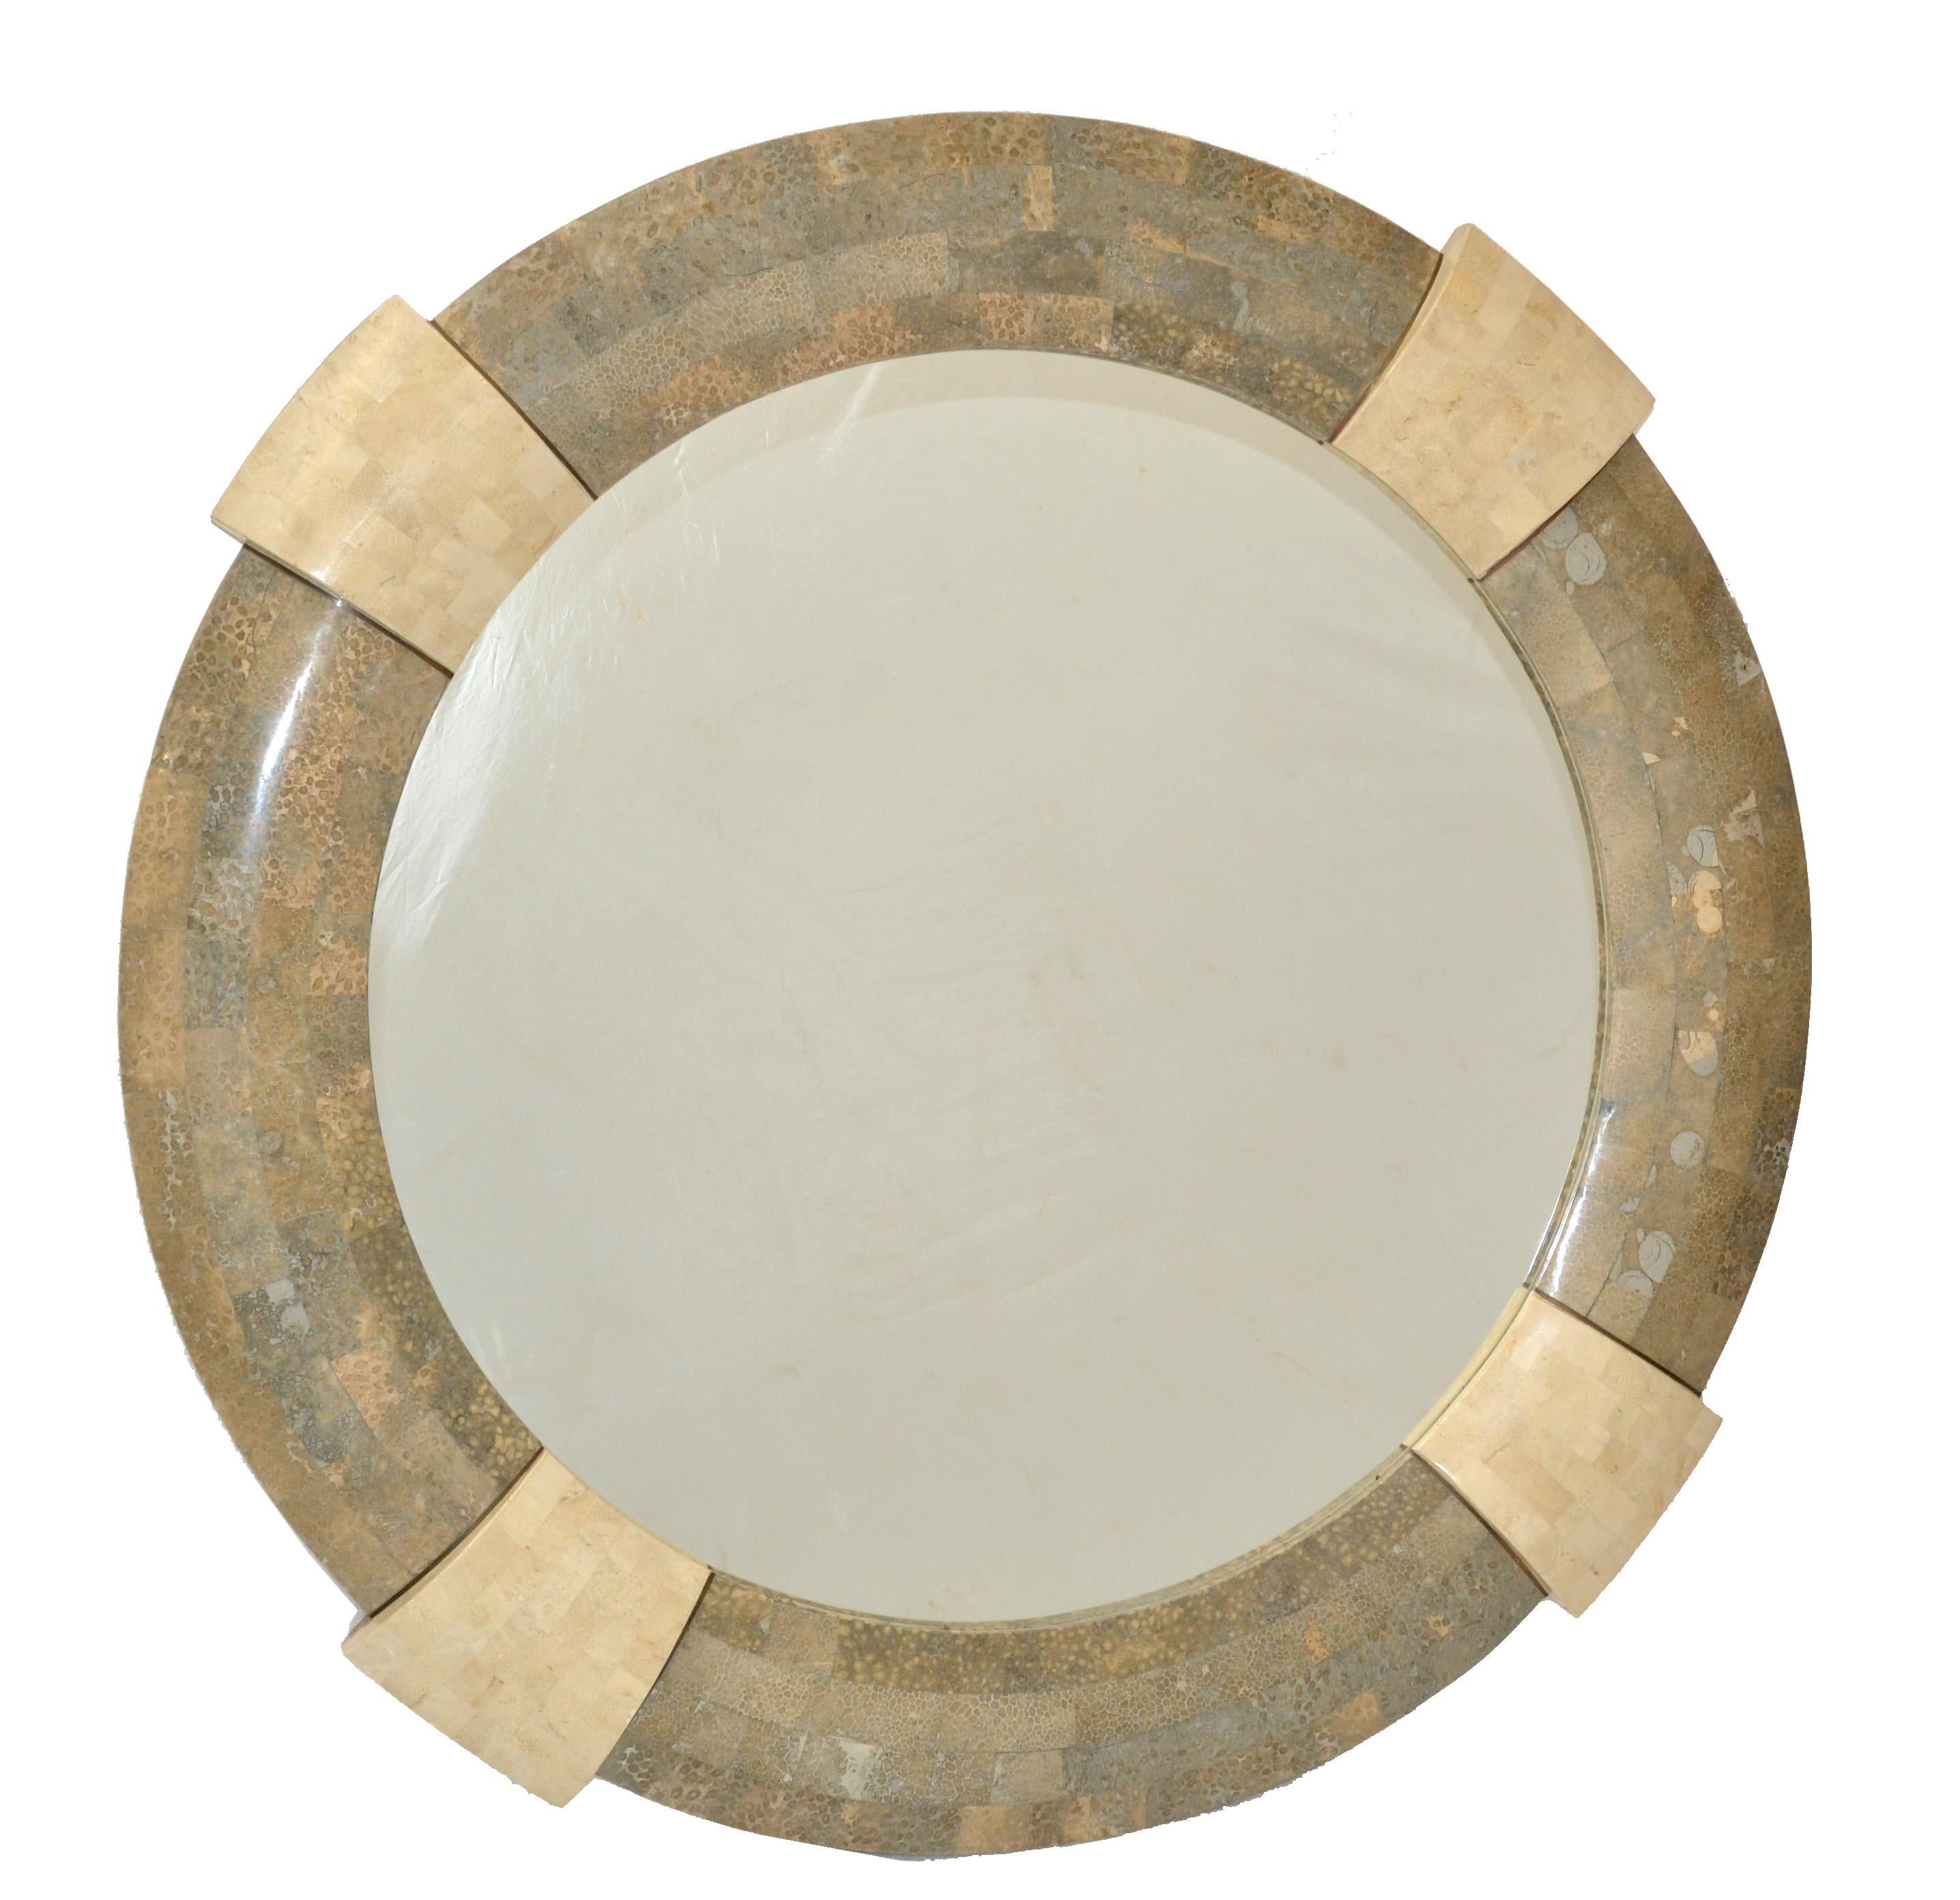 Handcrafted round tessellated mirror with beige and taupe color stone crossbands.
Designed by Robert Marcius for Maitland Smith in America in the 1980.
Mid-Century Modern Design for any interior Style.
Mirror glass dimension: 29.5 inches.
 